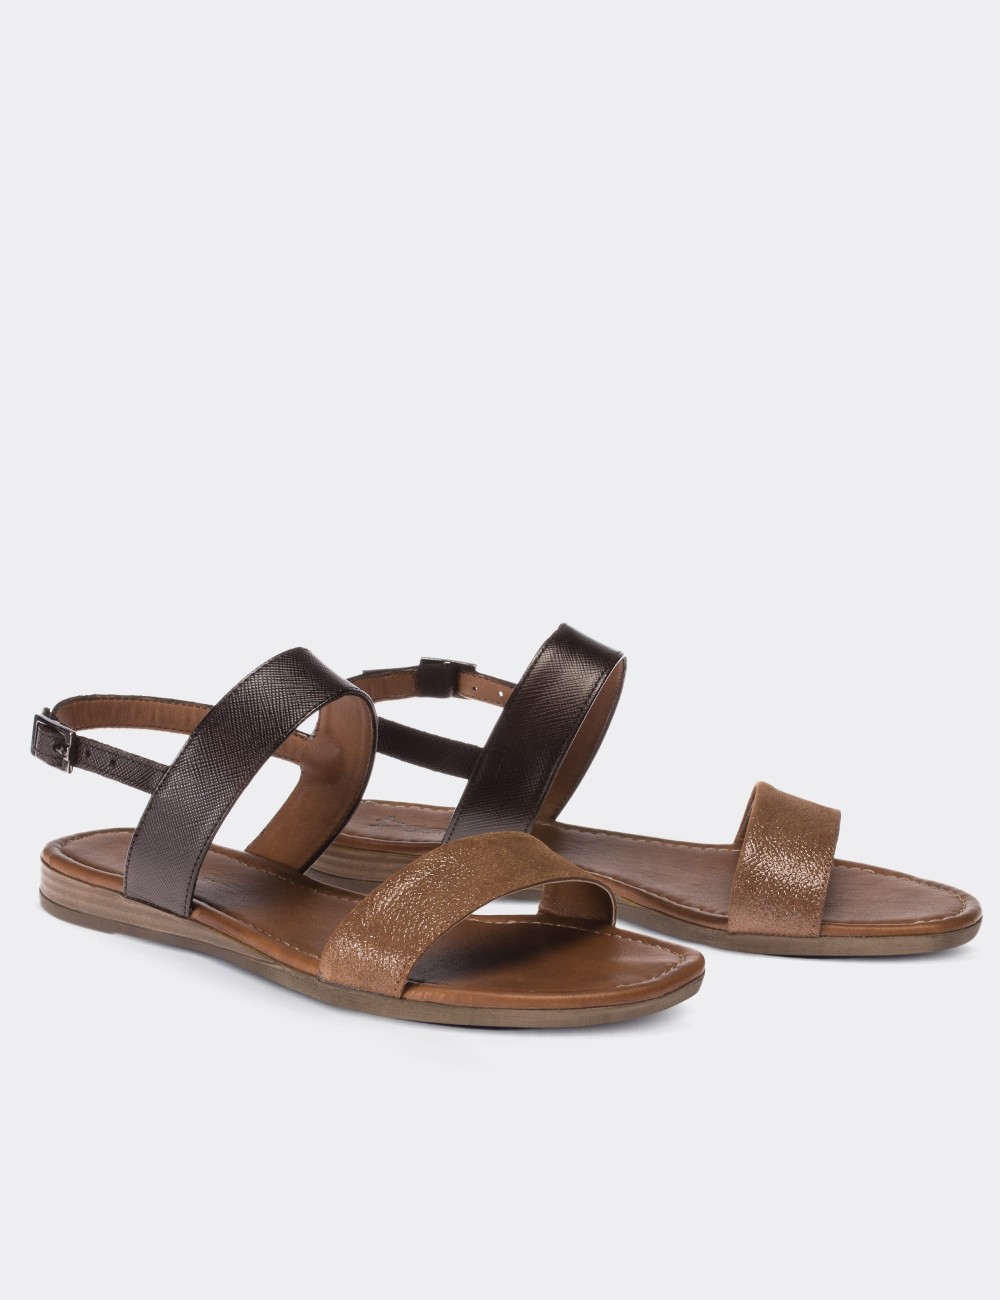 Tan  Leather  Sandals - 02120ZTBAC01